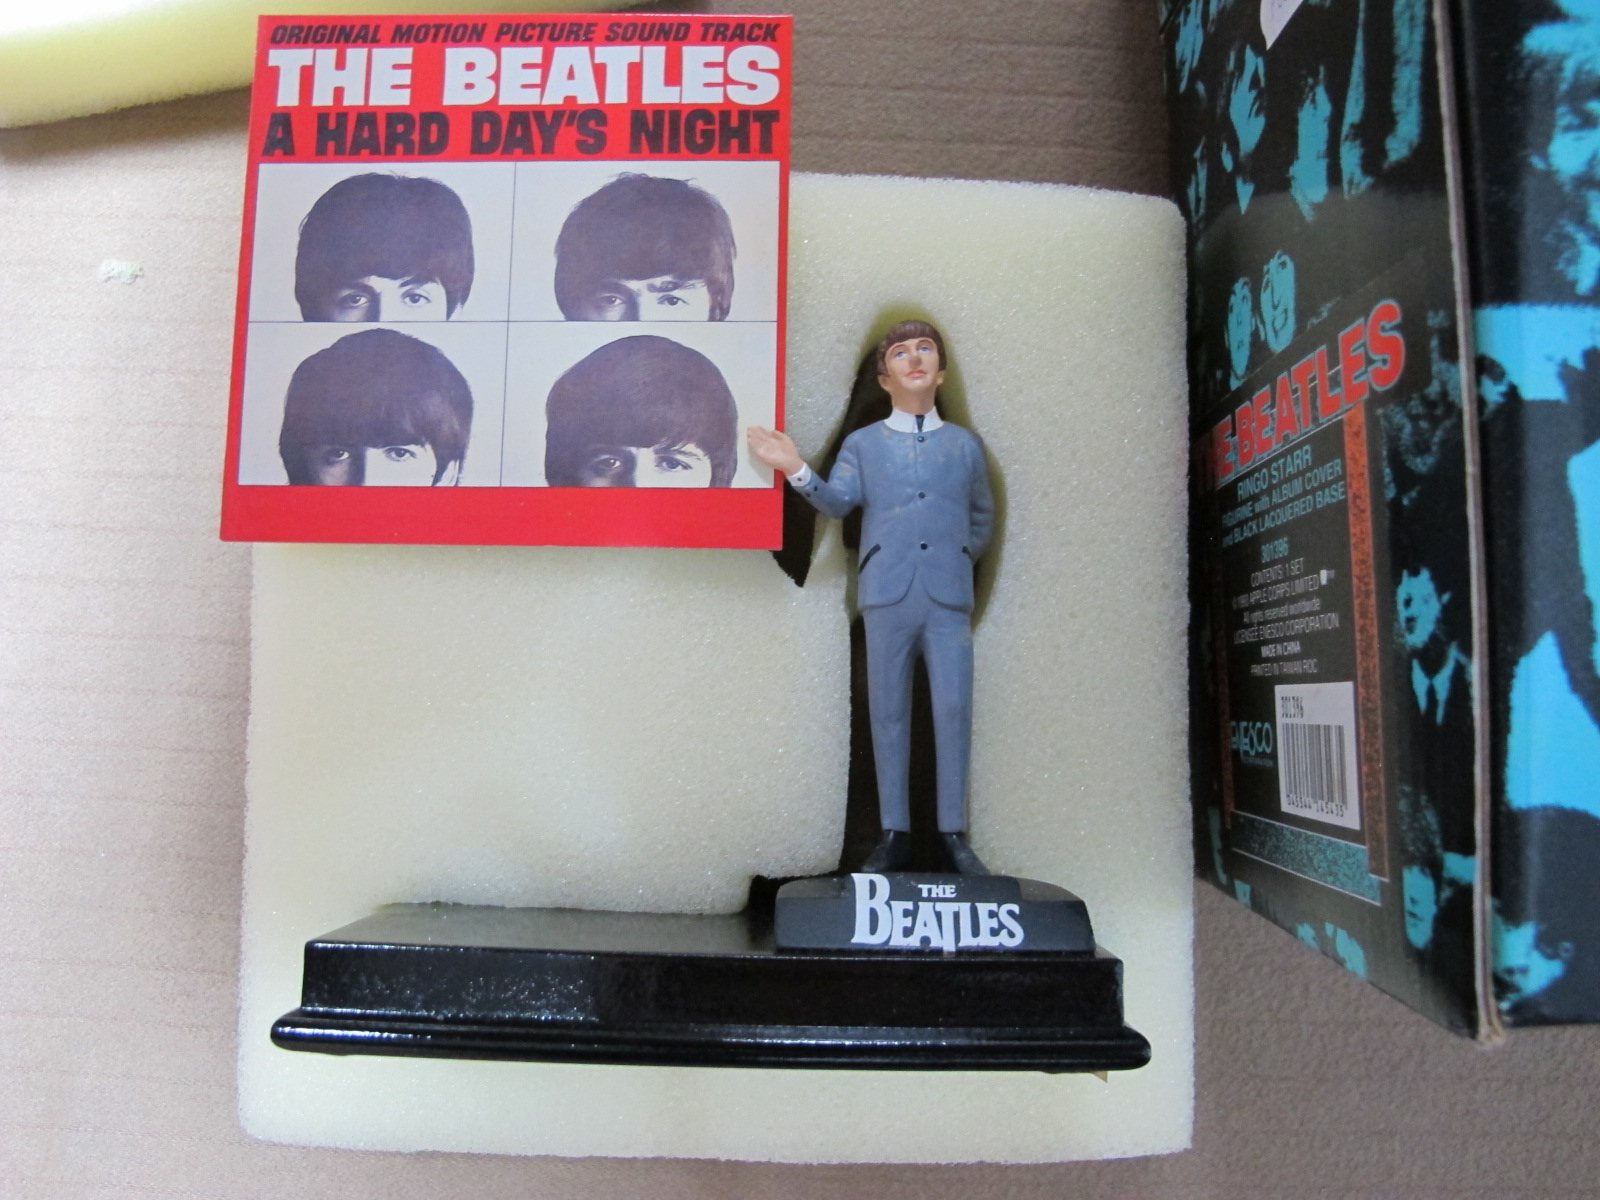 A Modern 'The Beatles'Ringo Starr Figurine, by Enesco with album cover, boxed.